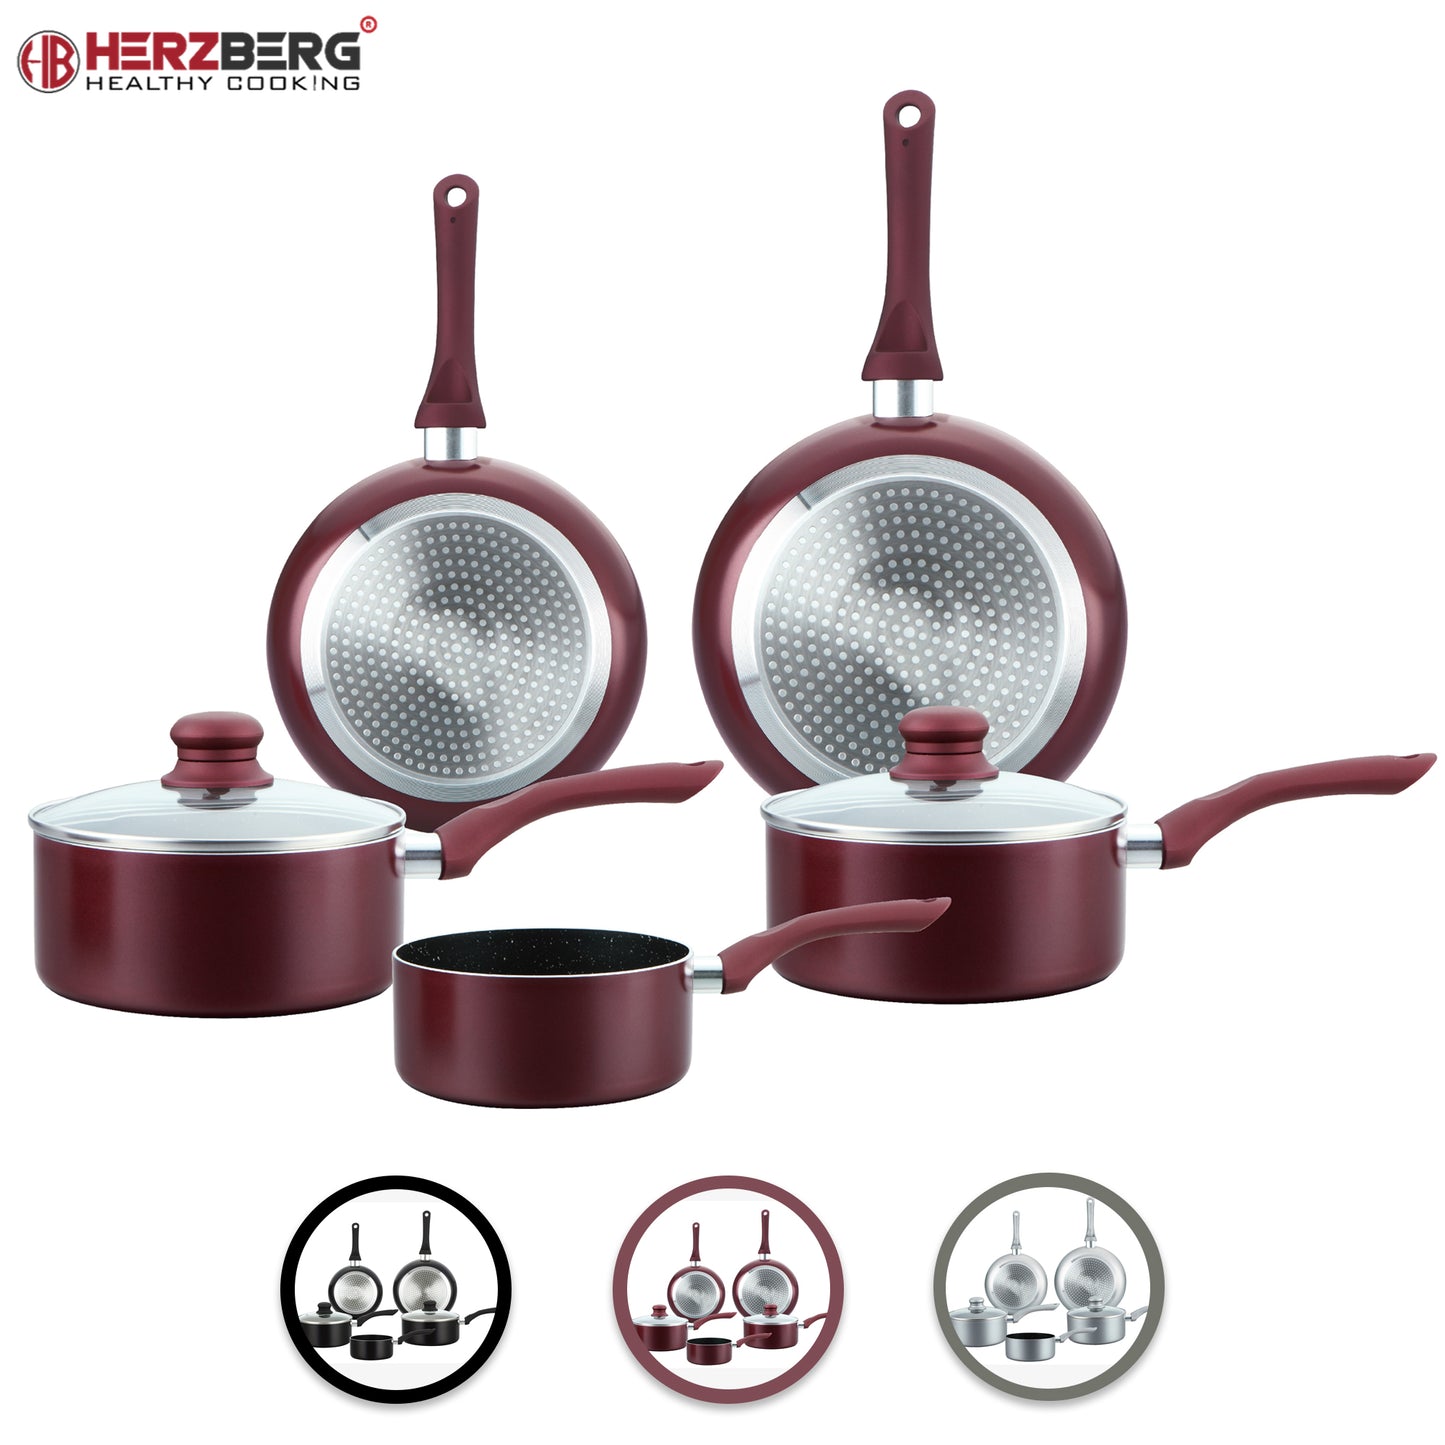 Herzberg 7 Pieces Non-Stick Stone Coated Cookware Set Silver